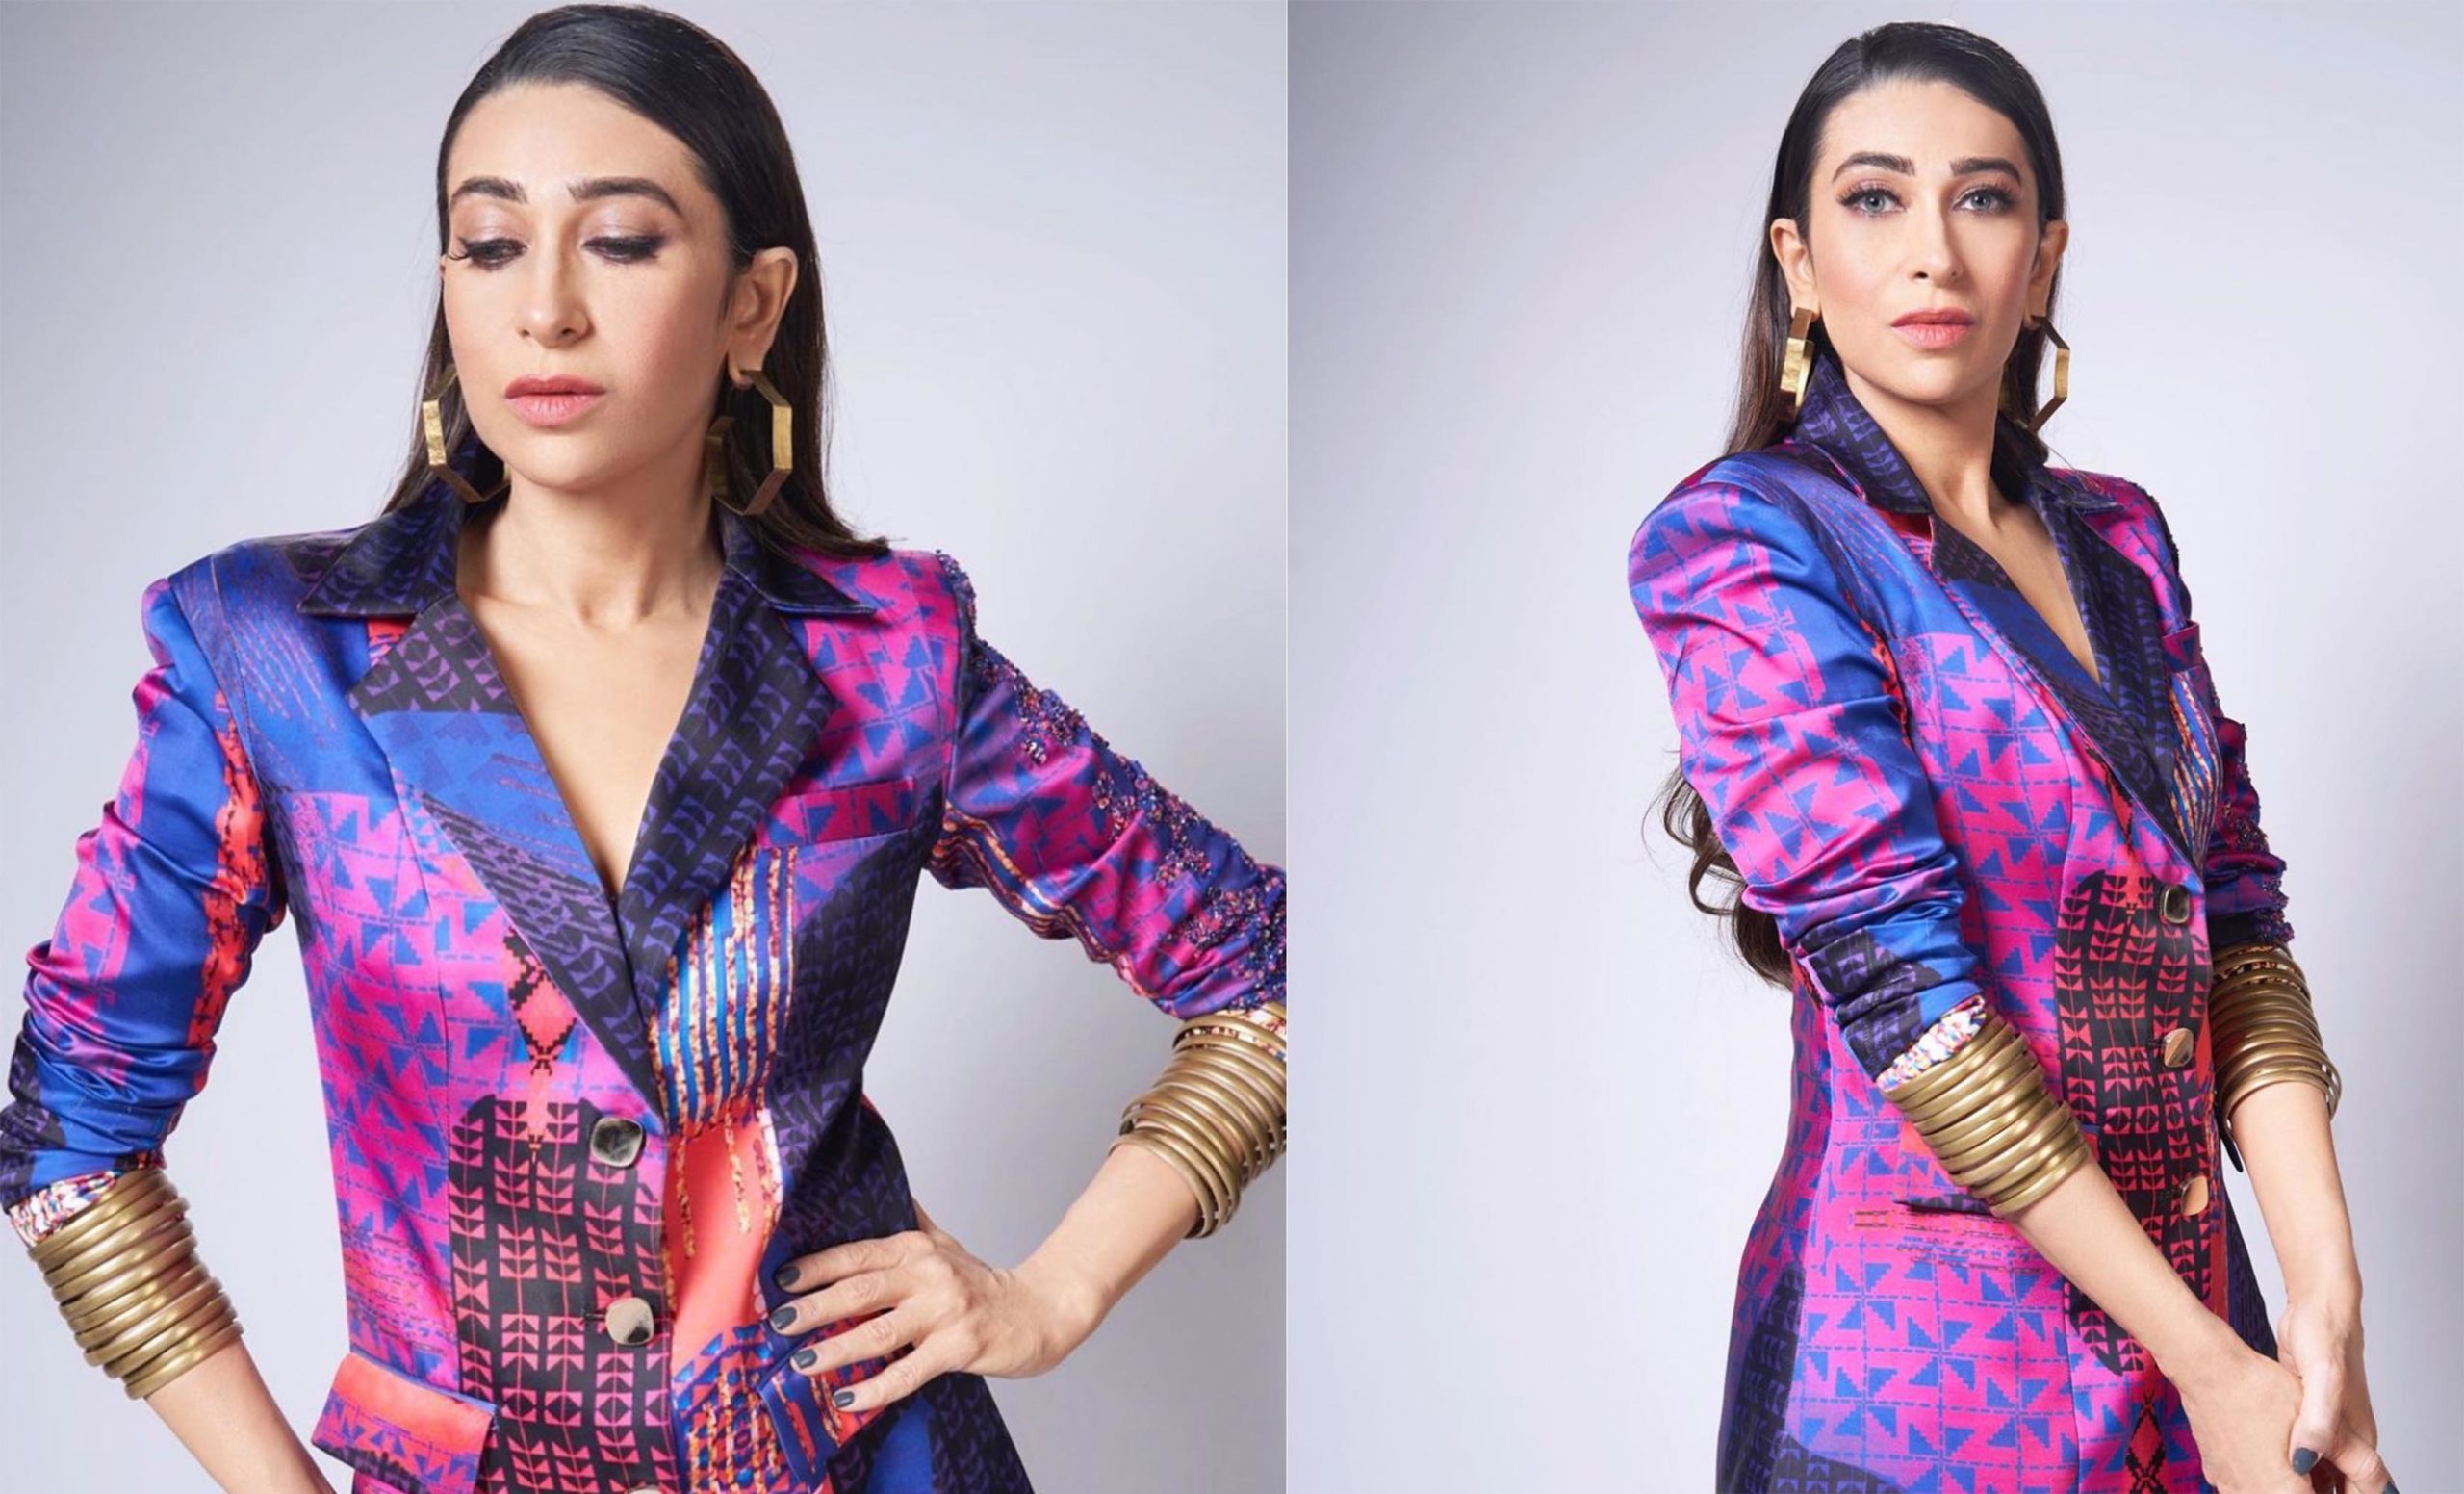 Karisma Kapoor’s Power Suit Is Playful And We Say Karisma ‘Dil Le Gayi, le Gayi’